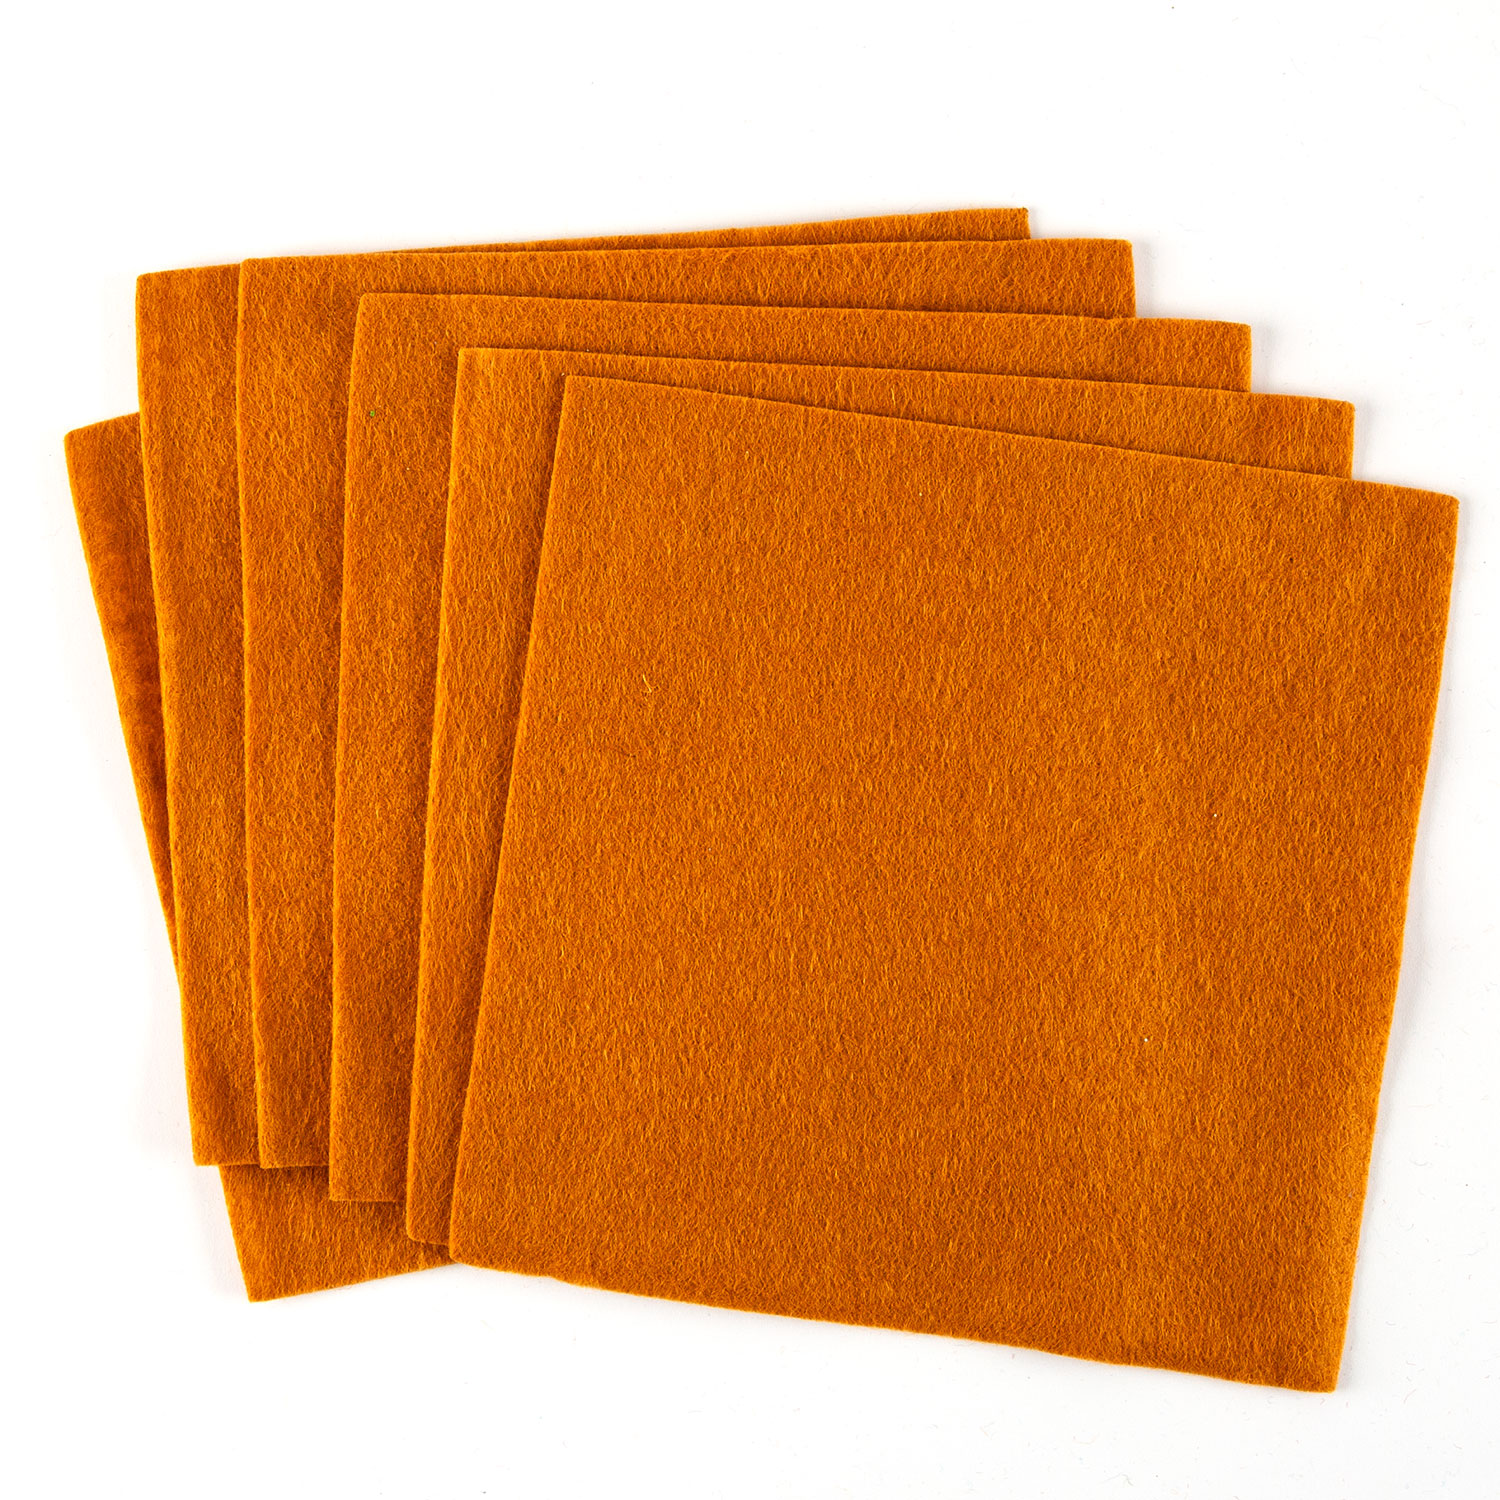 Felt by Clarity Pack of 6 Tile Backers 6x6" Non Adhesive Felt Pick N Mix - Pick any 2 - Golden Sand